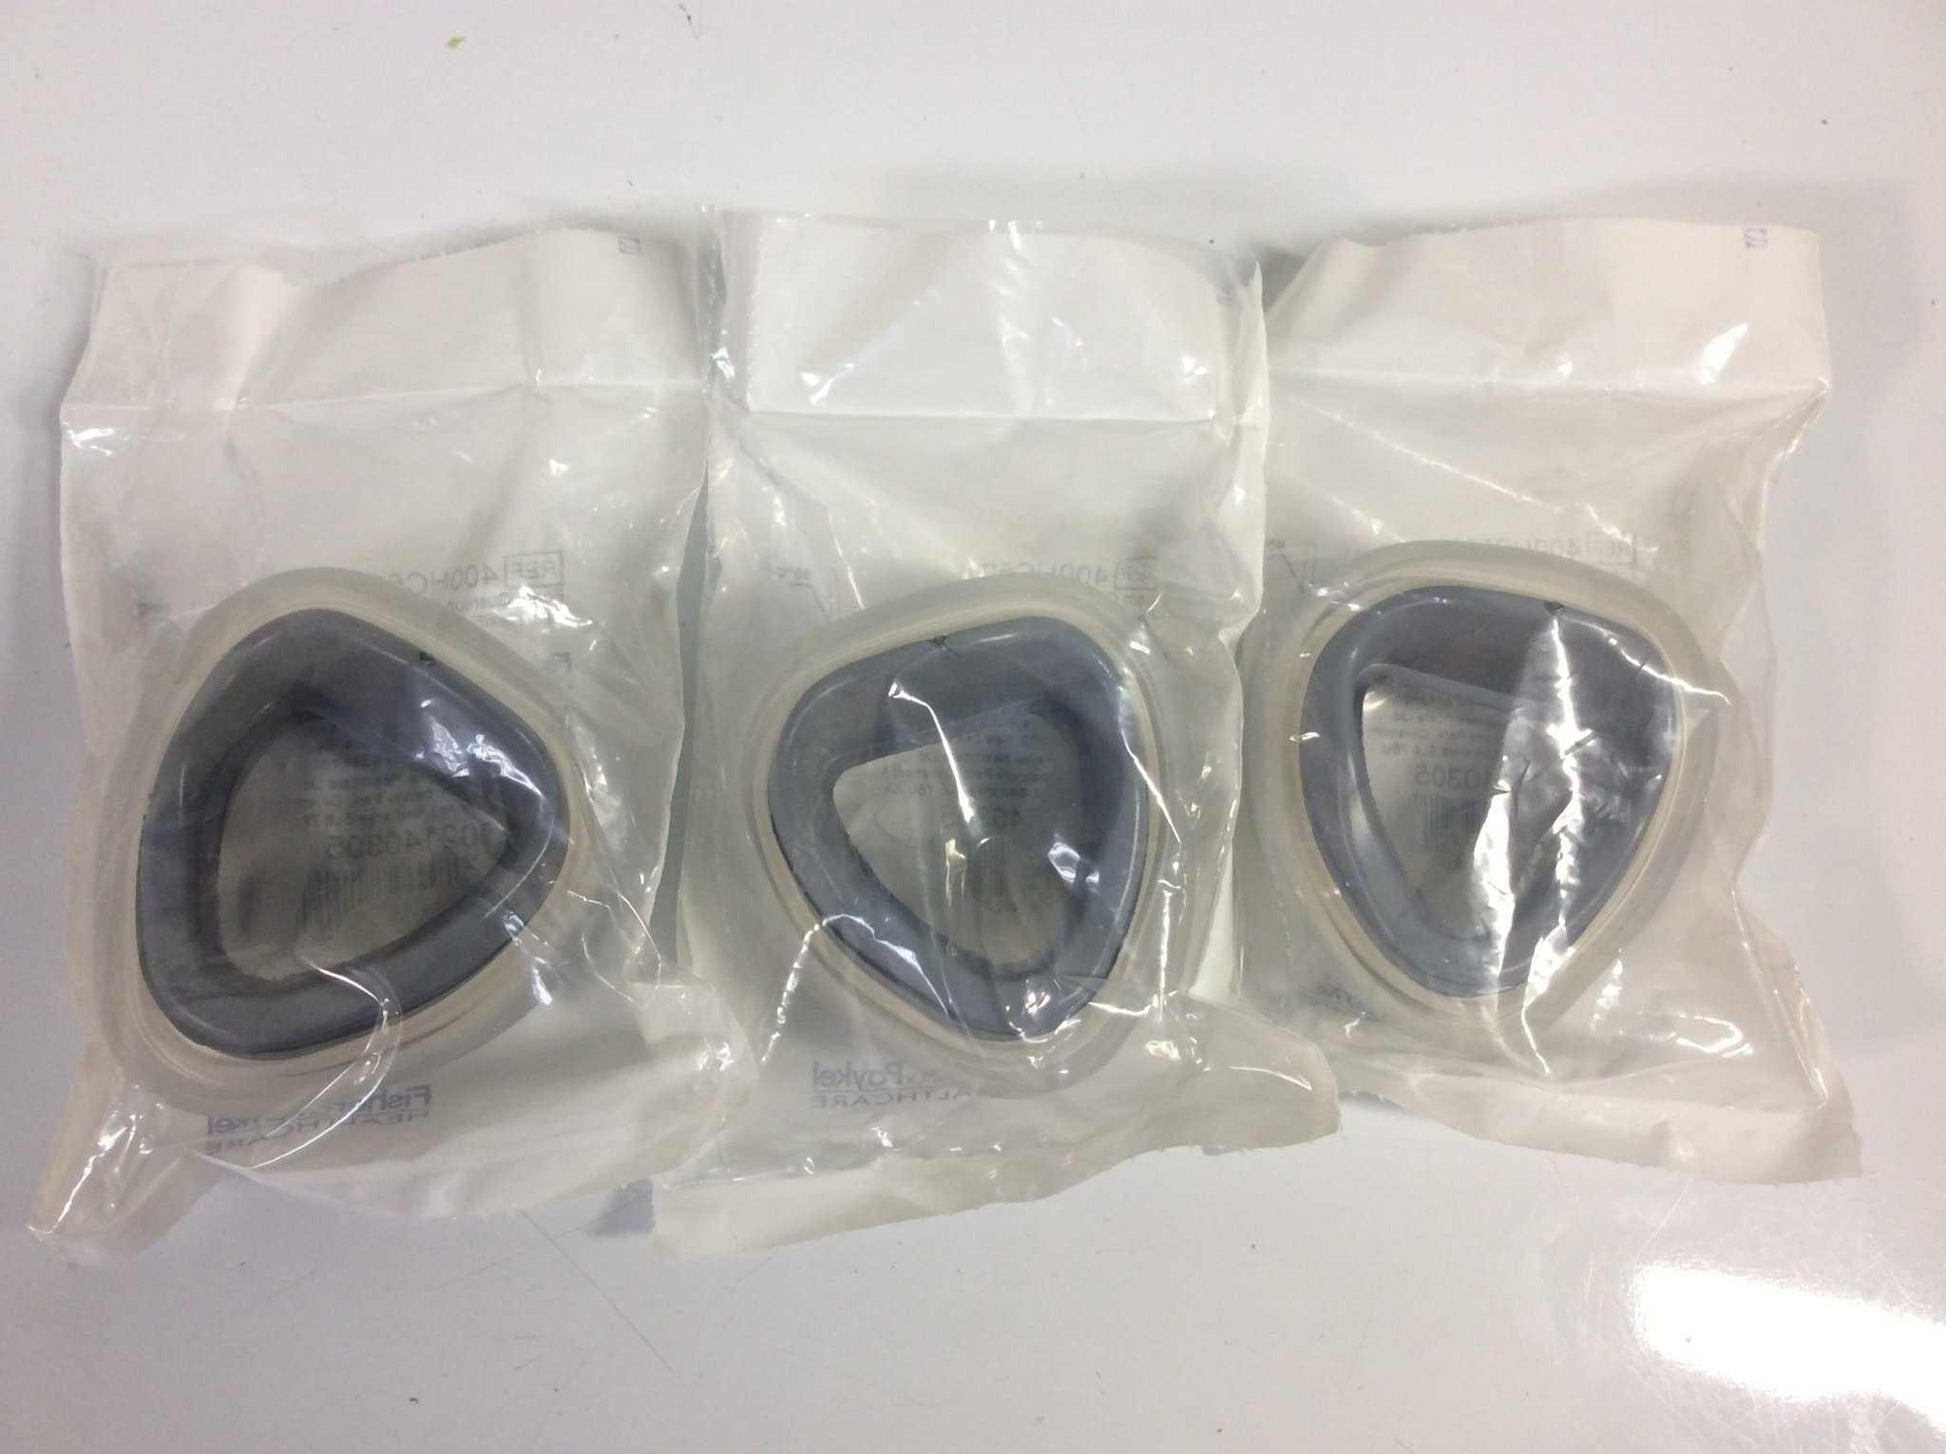 Lot of 3 NEW Fisher & Paykel Nasal Cushion with Silicone Seal for FlexiFit 407 CPAP Masks 400HC501 - MBR Medicals